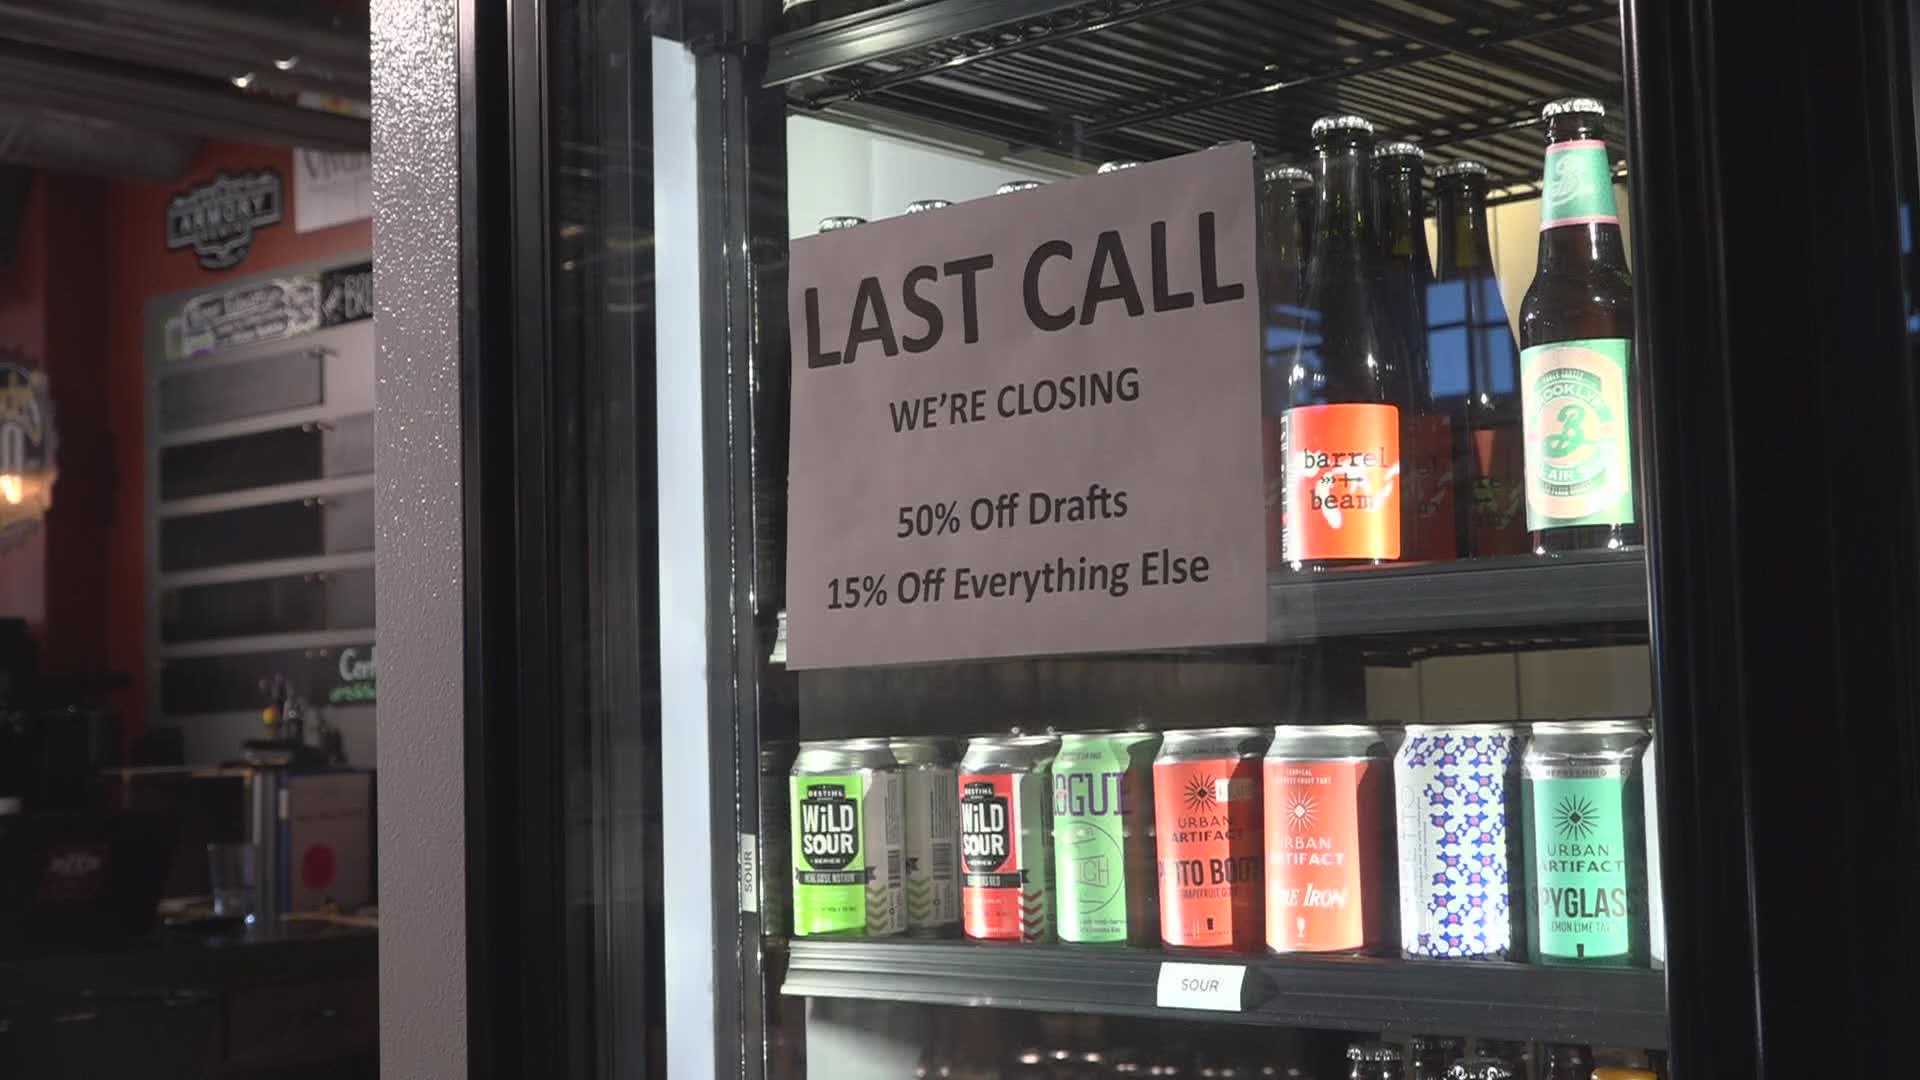 Six months into the pandemic, local businesses are facing unprecedented challenges.